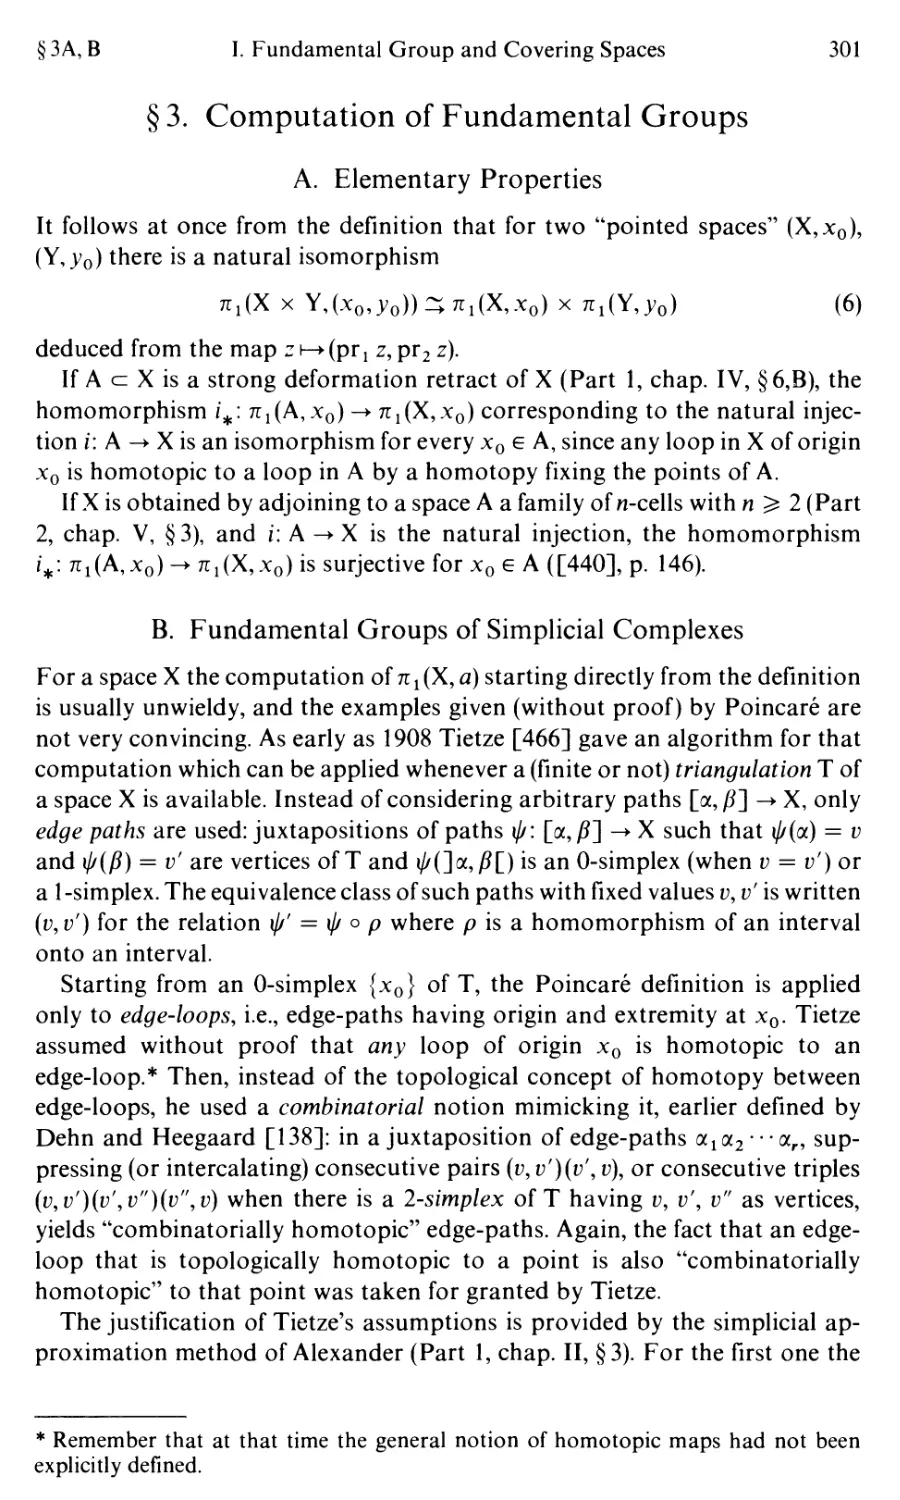 §3. Computation of Fundamental Groups
B. Fundamental Groups of Simplicial Complexes